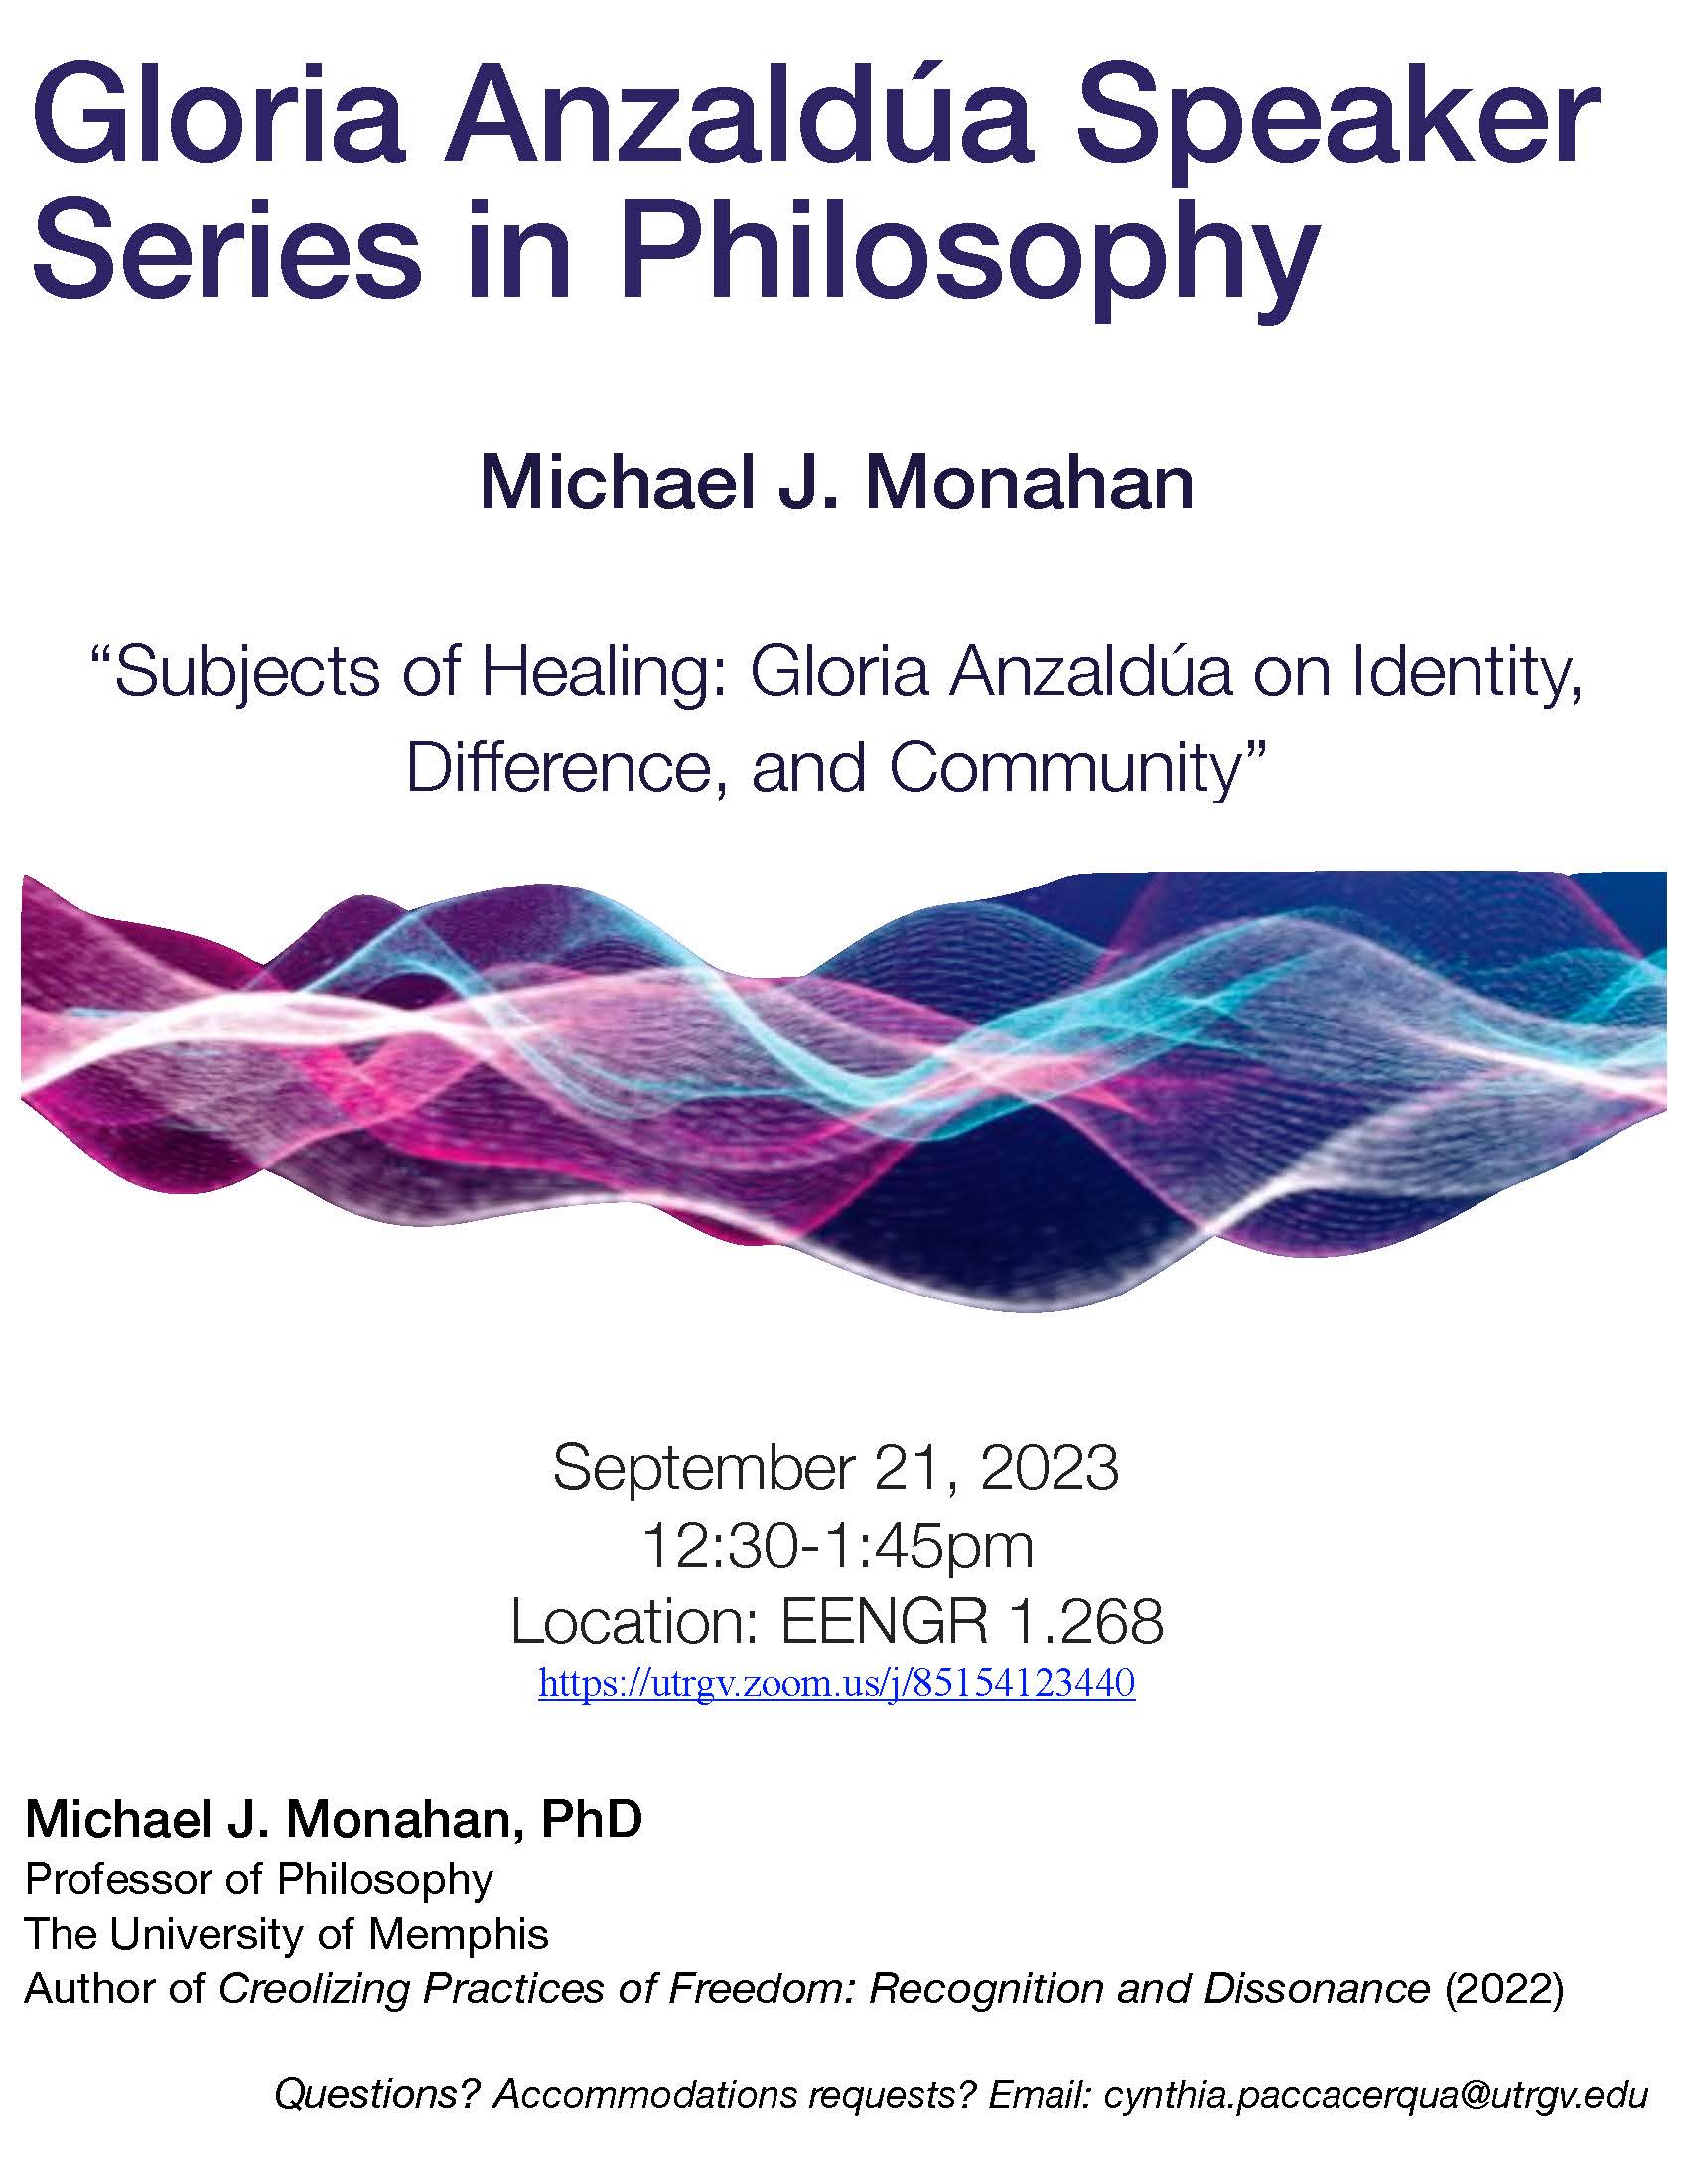 Dr. Michael Monahan (Memphis) will give a free talk as part of the Anzaldúa Speaker Series in Philosophy! 